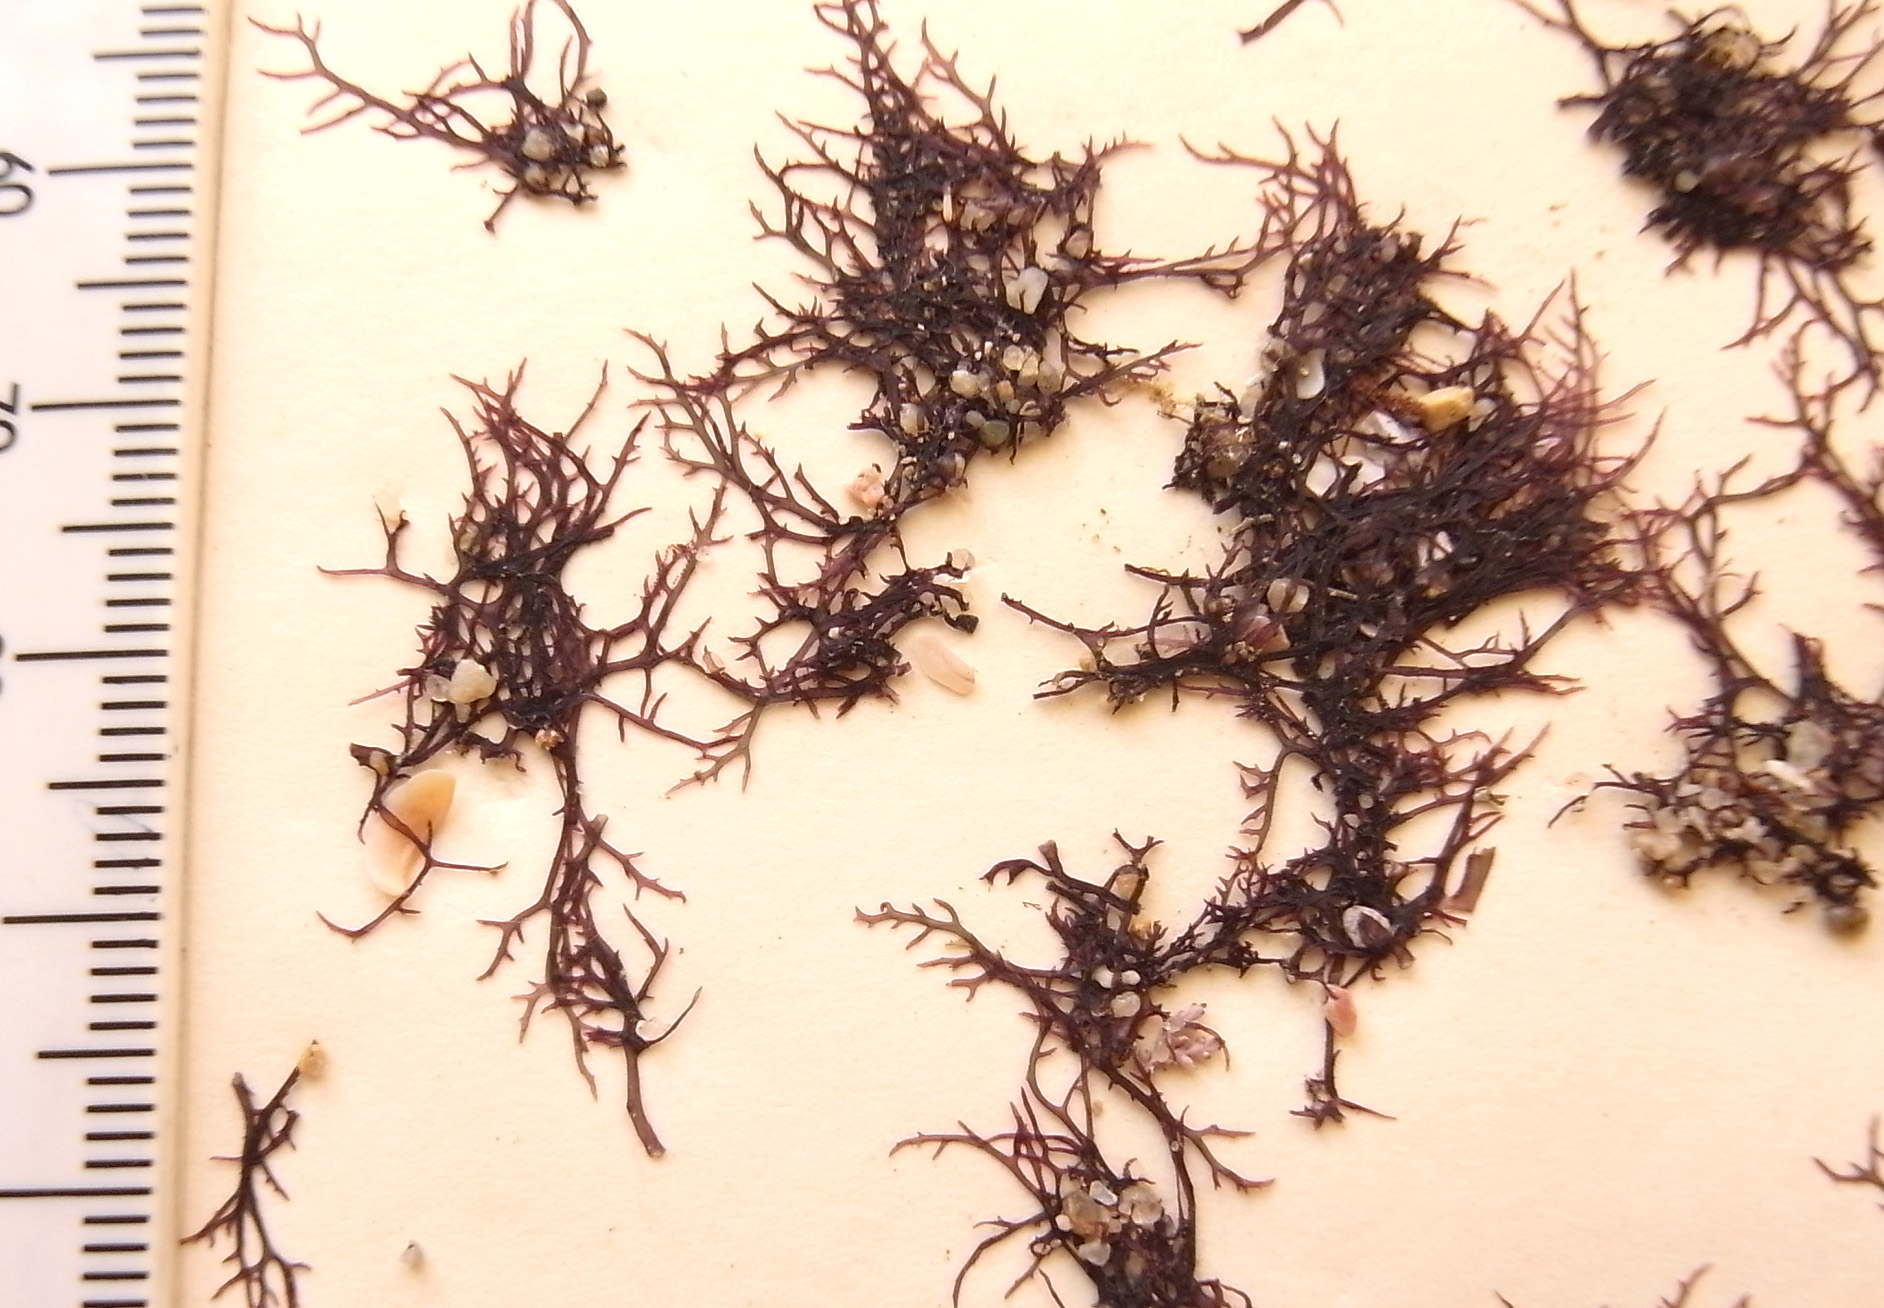 South African Seaweeds - south coast